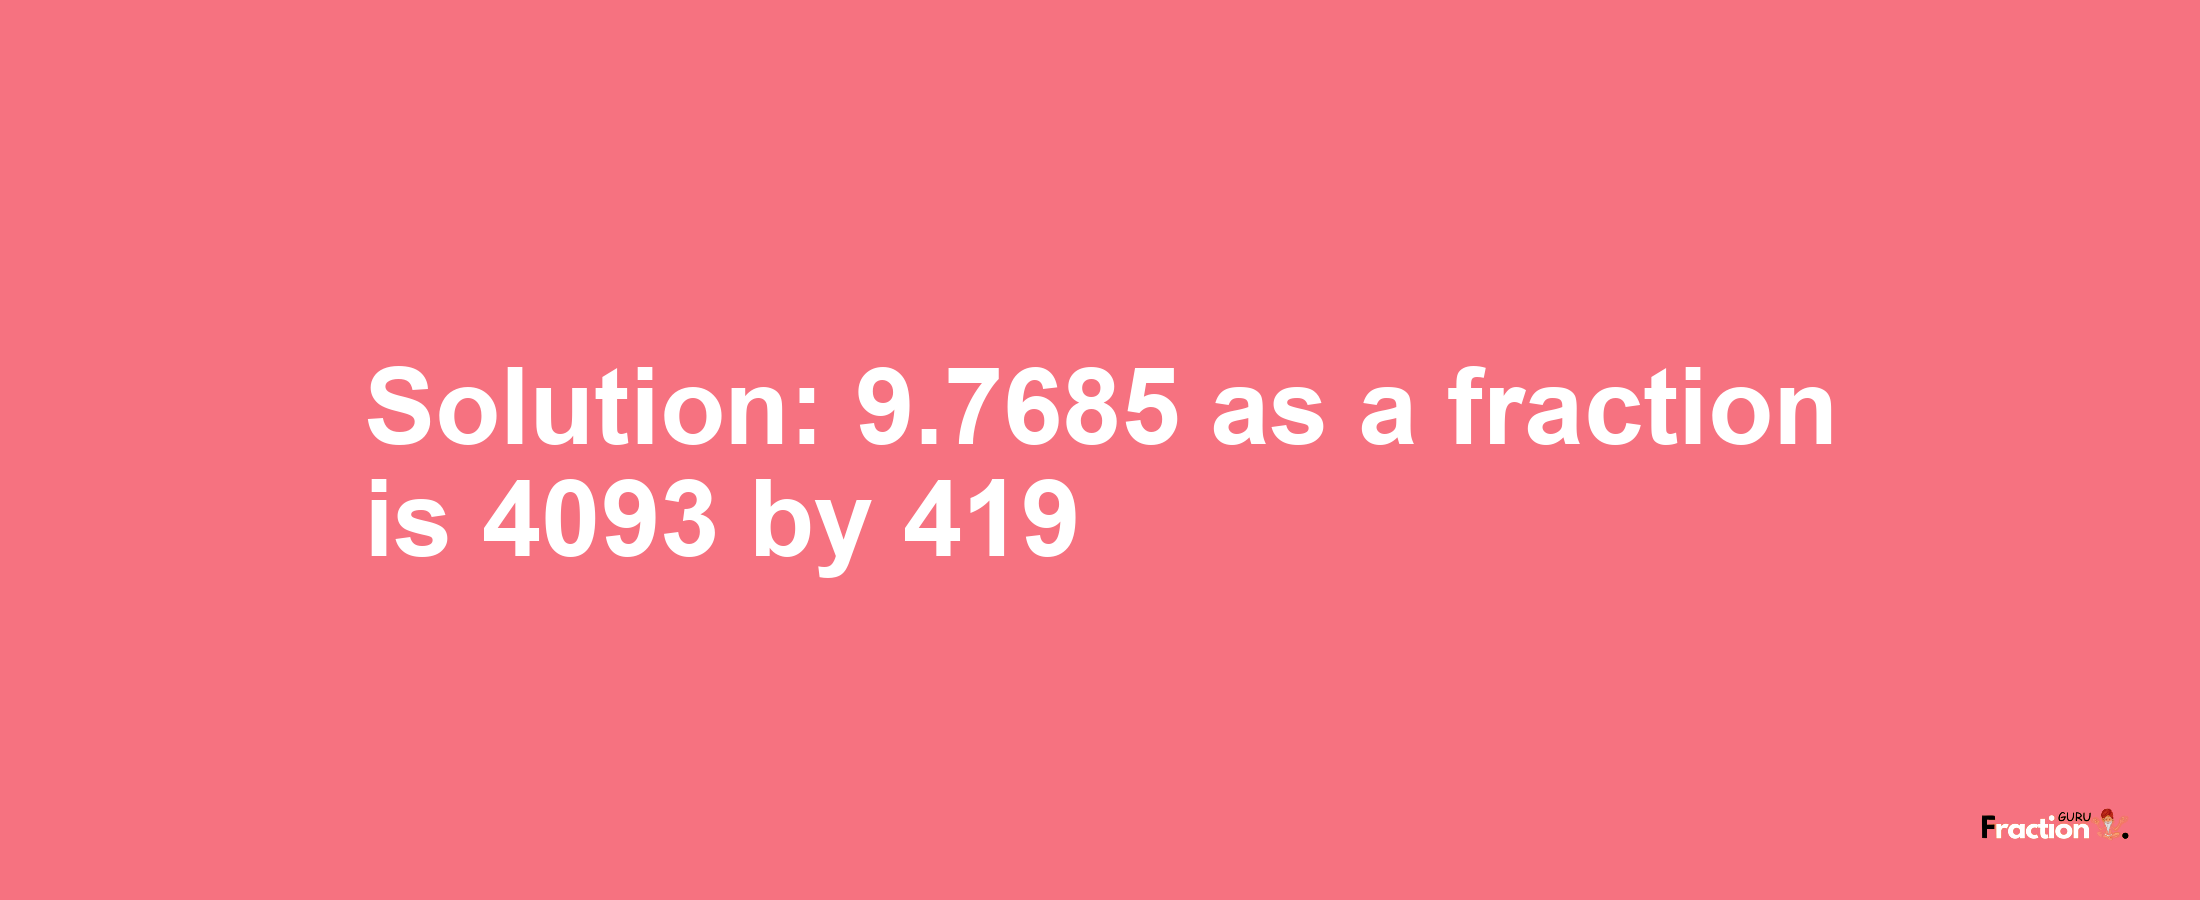 Solution:9.7685 as a fraction is 4093/419